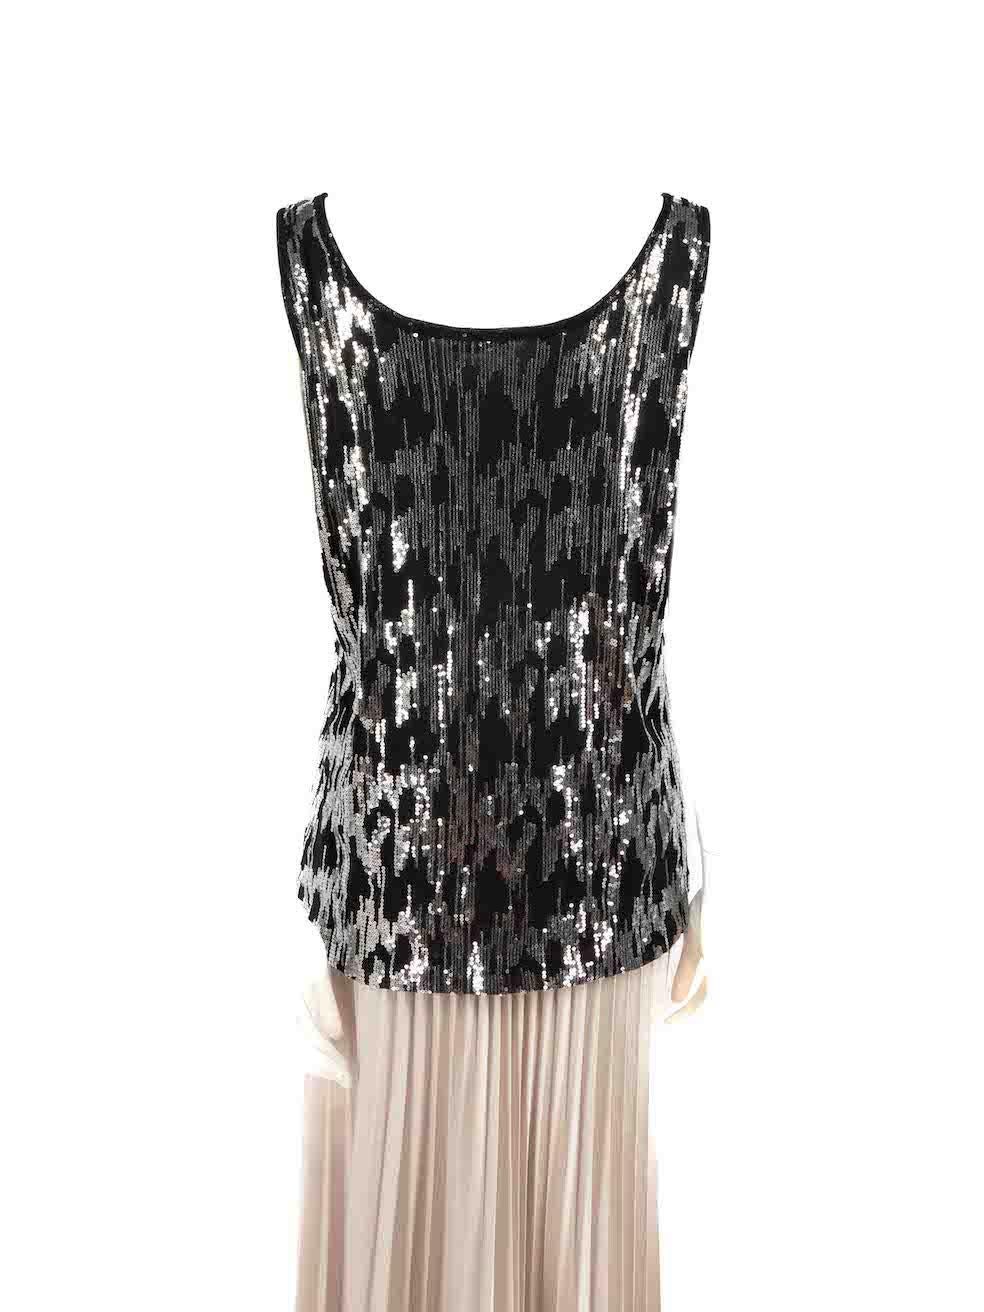 Versace Black Sequin Sleeveless Top Size L In Good Condition For Sale In London, GB